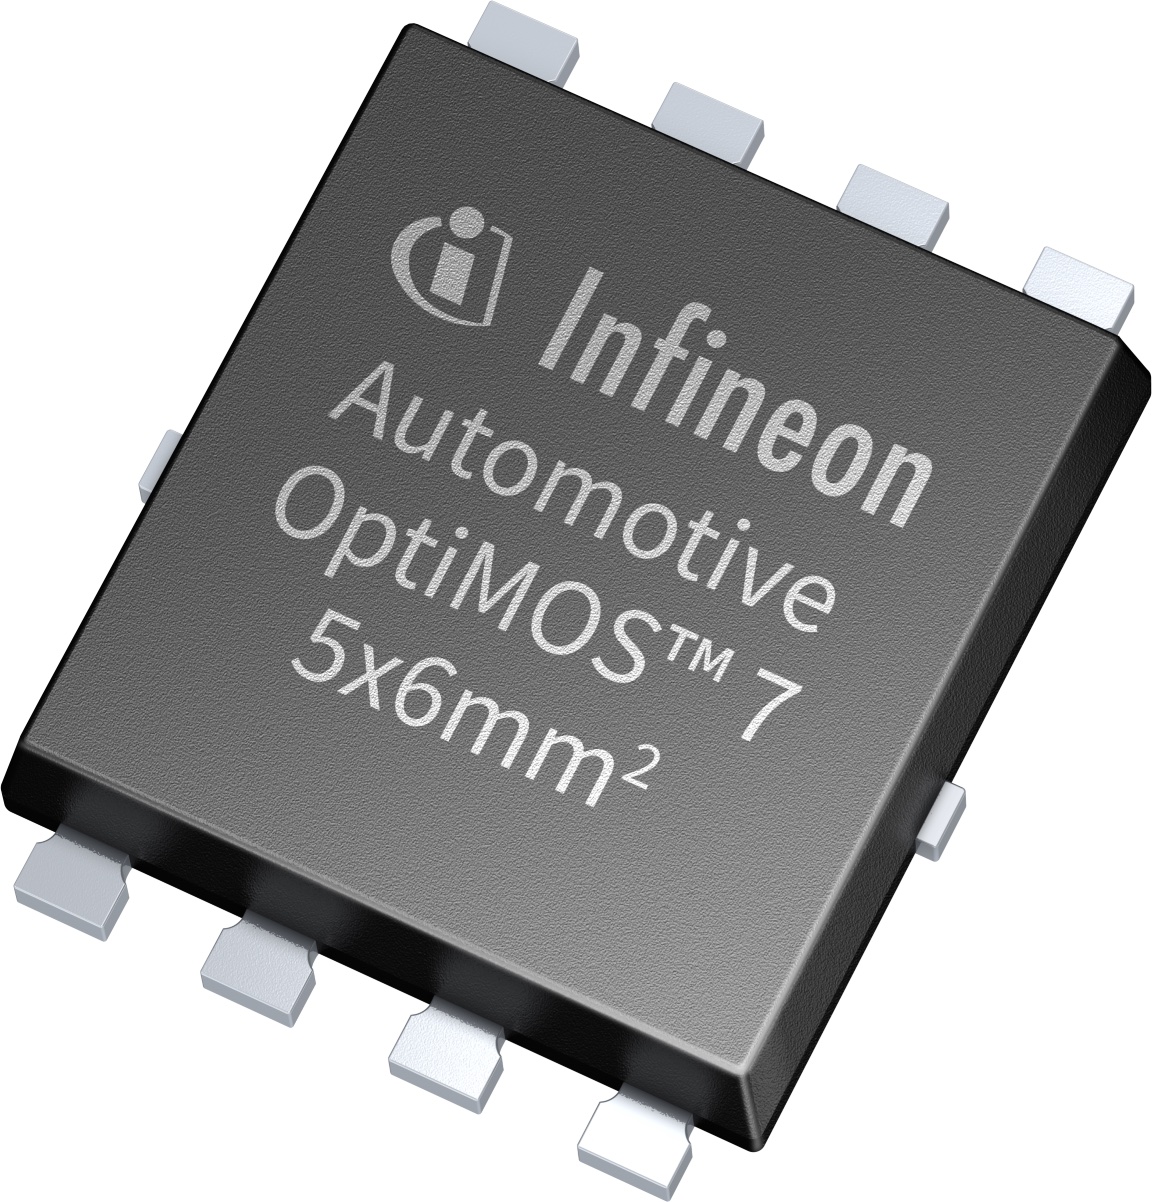 Infineon Introduces 80 V MOSFET OptiMOS 7 with Lowest On-Resistance in the Industry for Automotive Applications